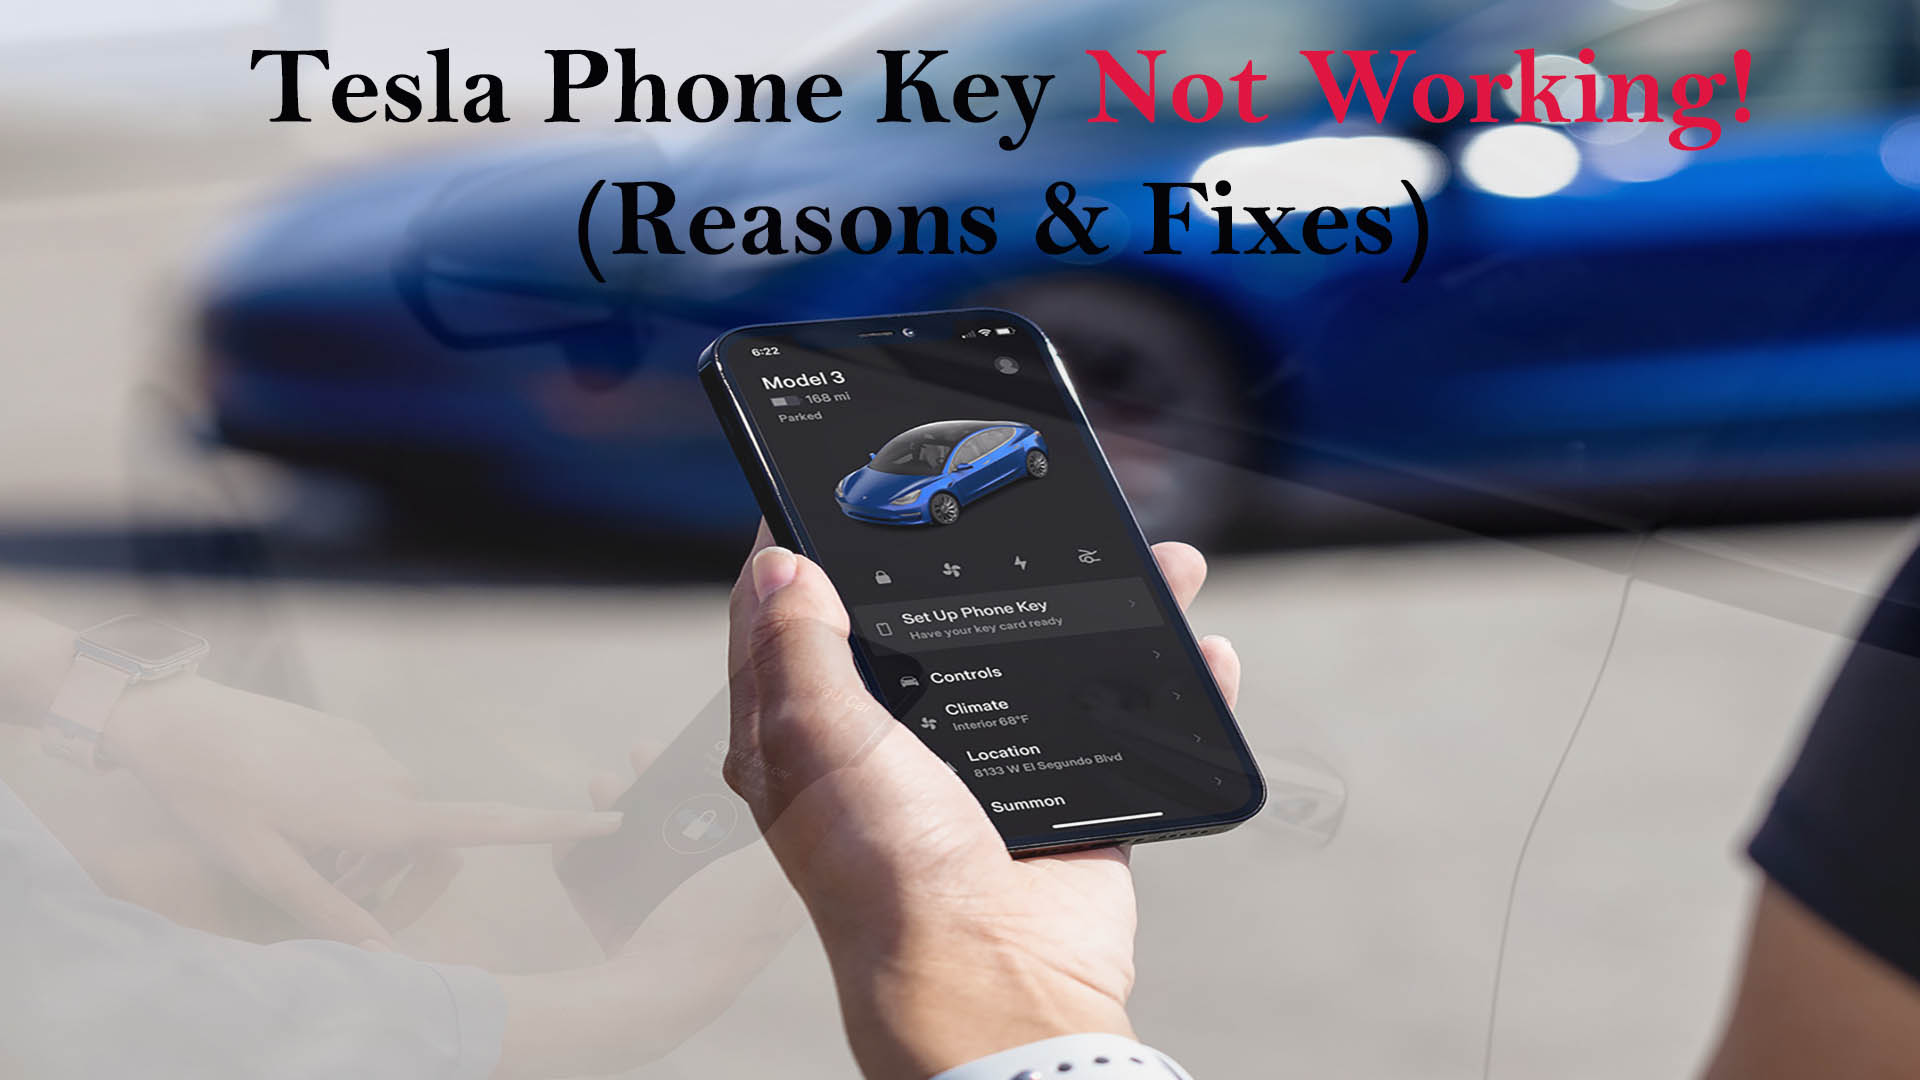 Tesla Phone Key Not Working: Reasons and Fixes